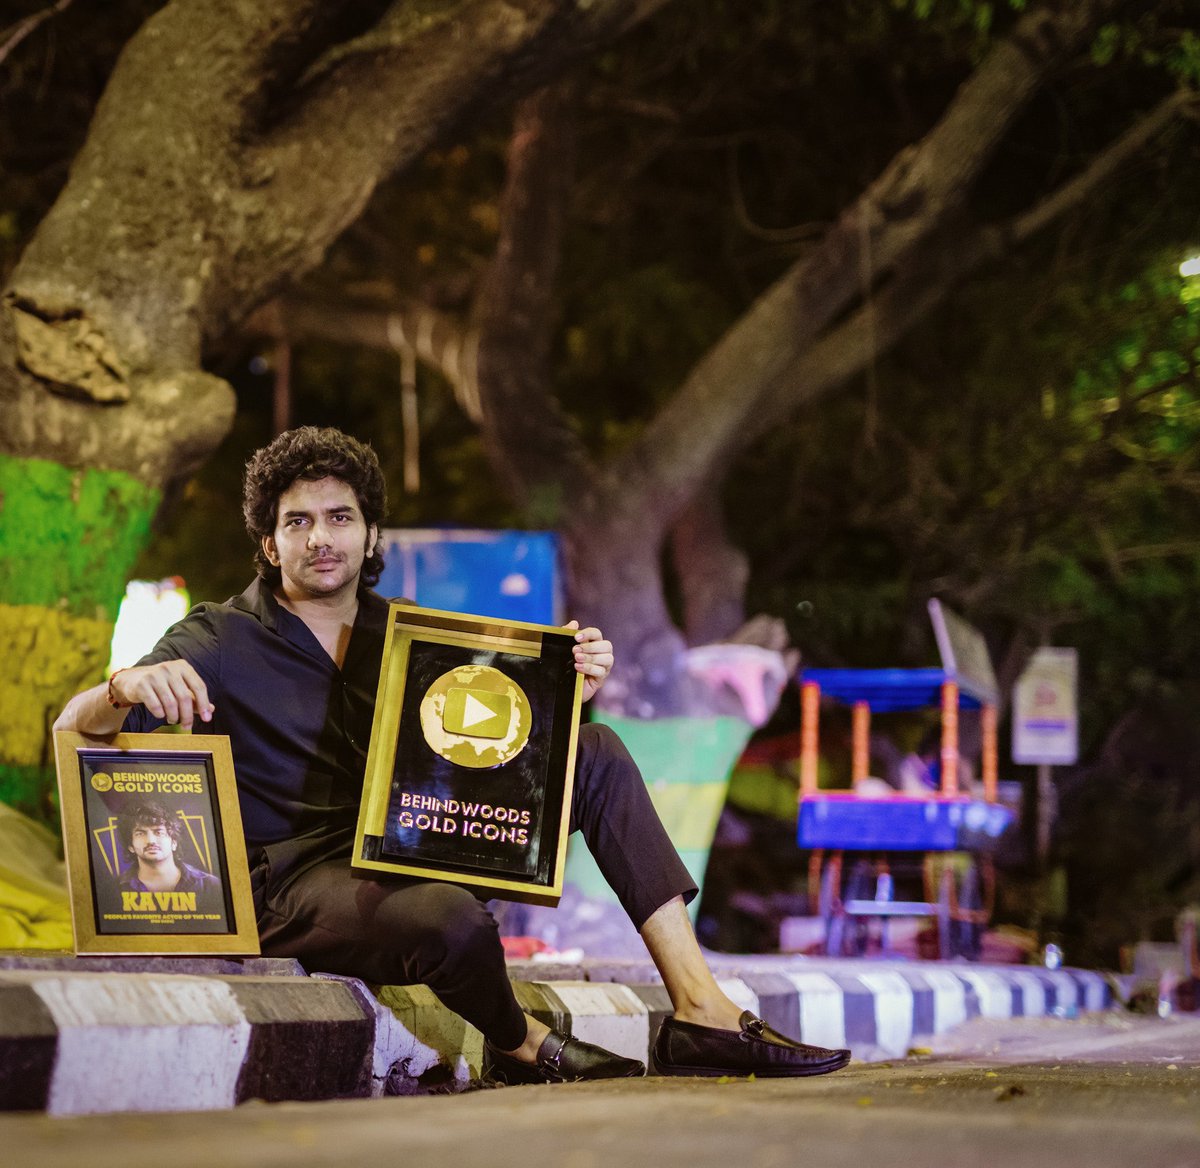 Kavin | People’s Fav Actor of the Year.

#BehindwoodsGoldIcons